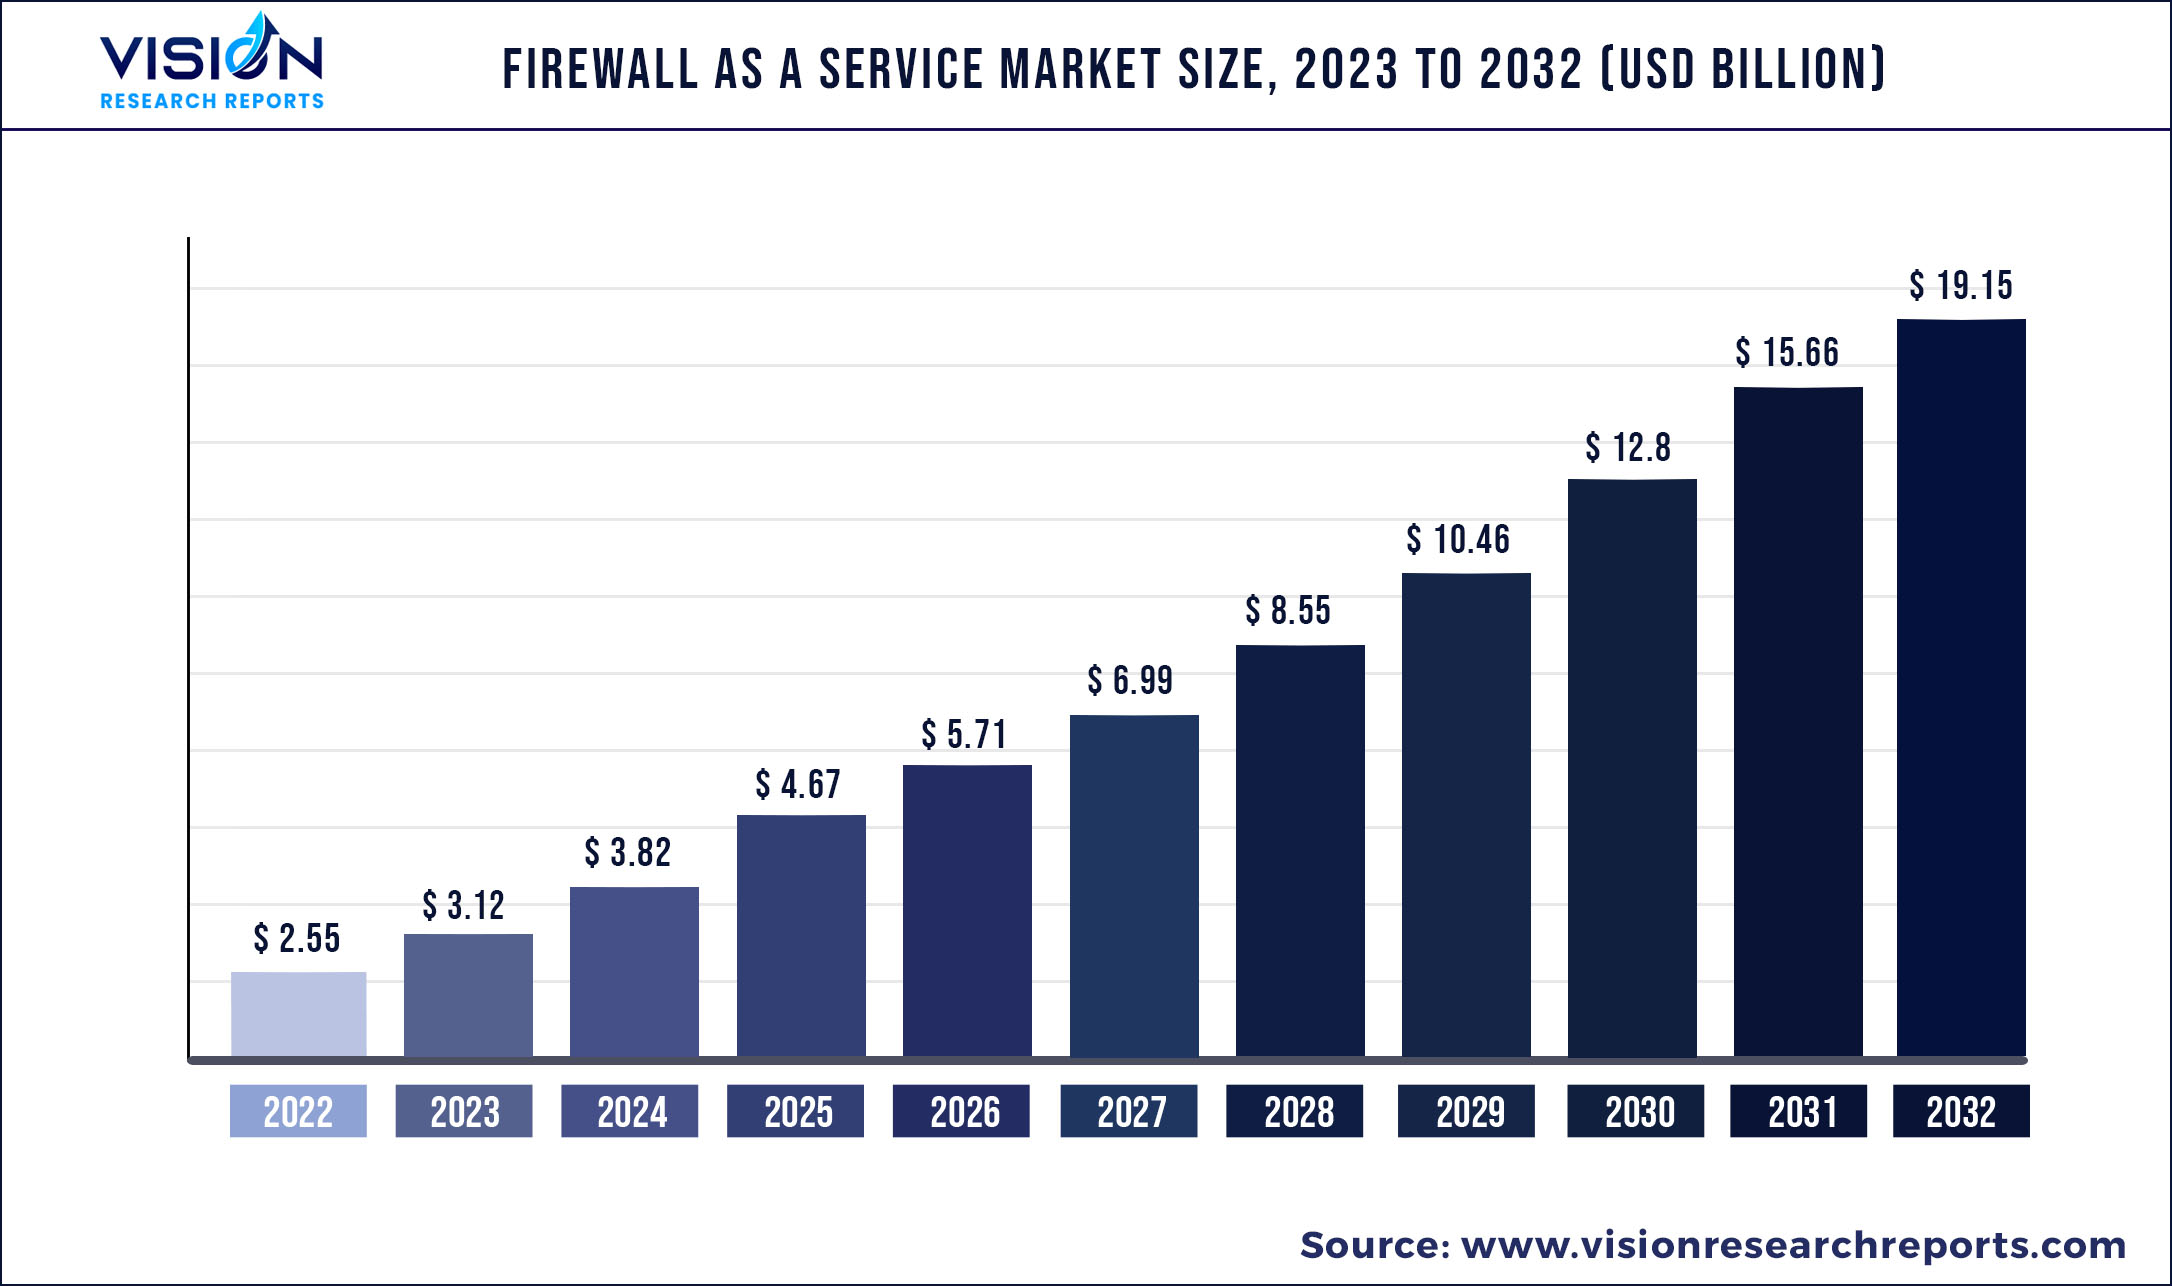 Firewall As A Service Market Size 2023 to 2032